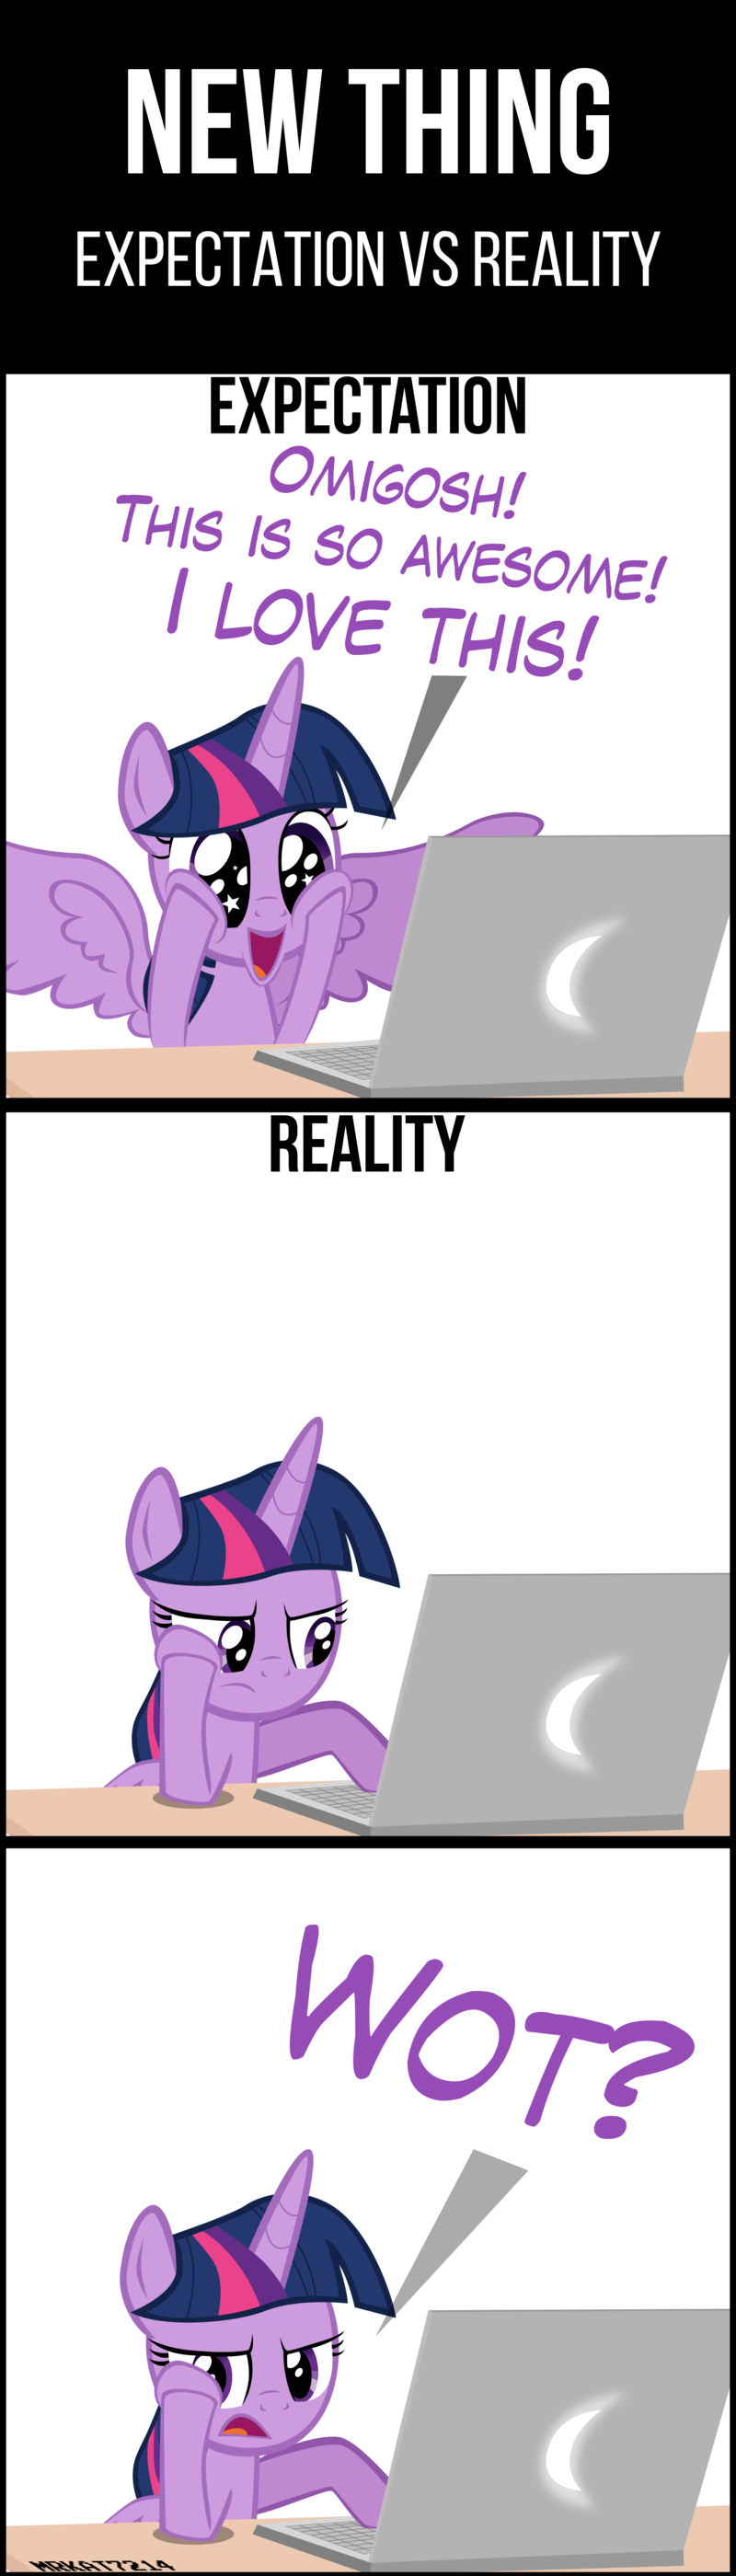 Comic 14 - New Thing (Expectation vs Reality)